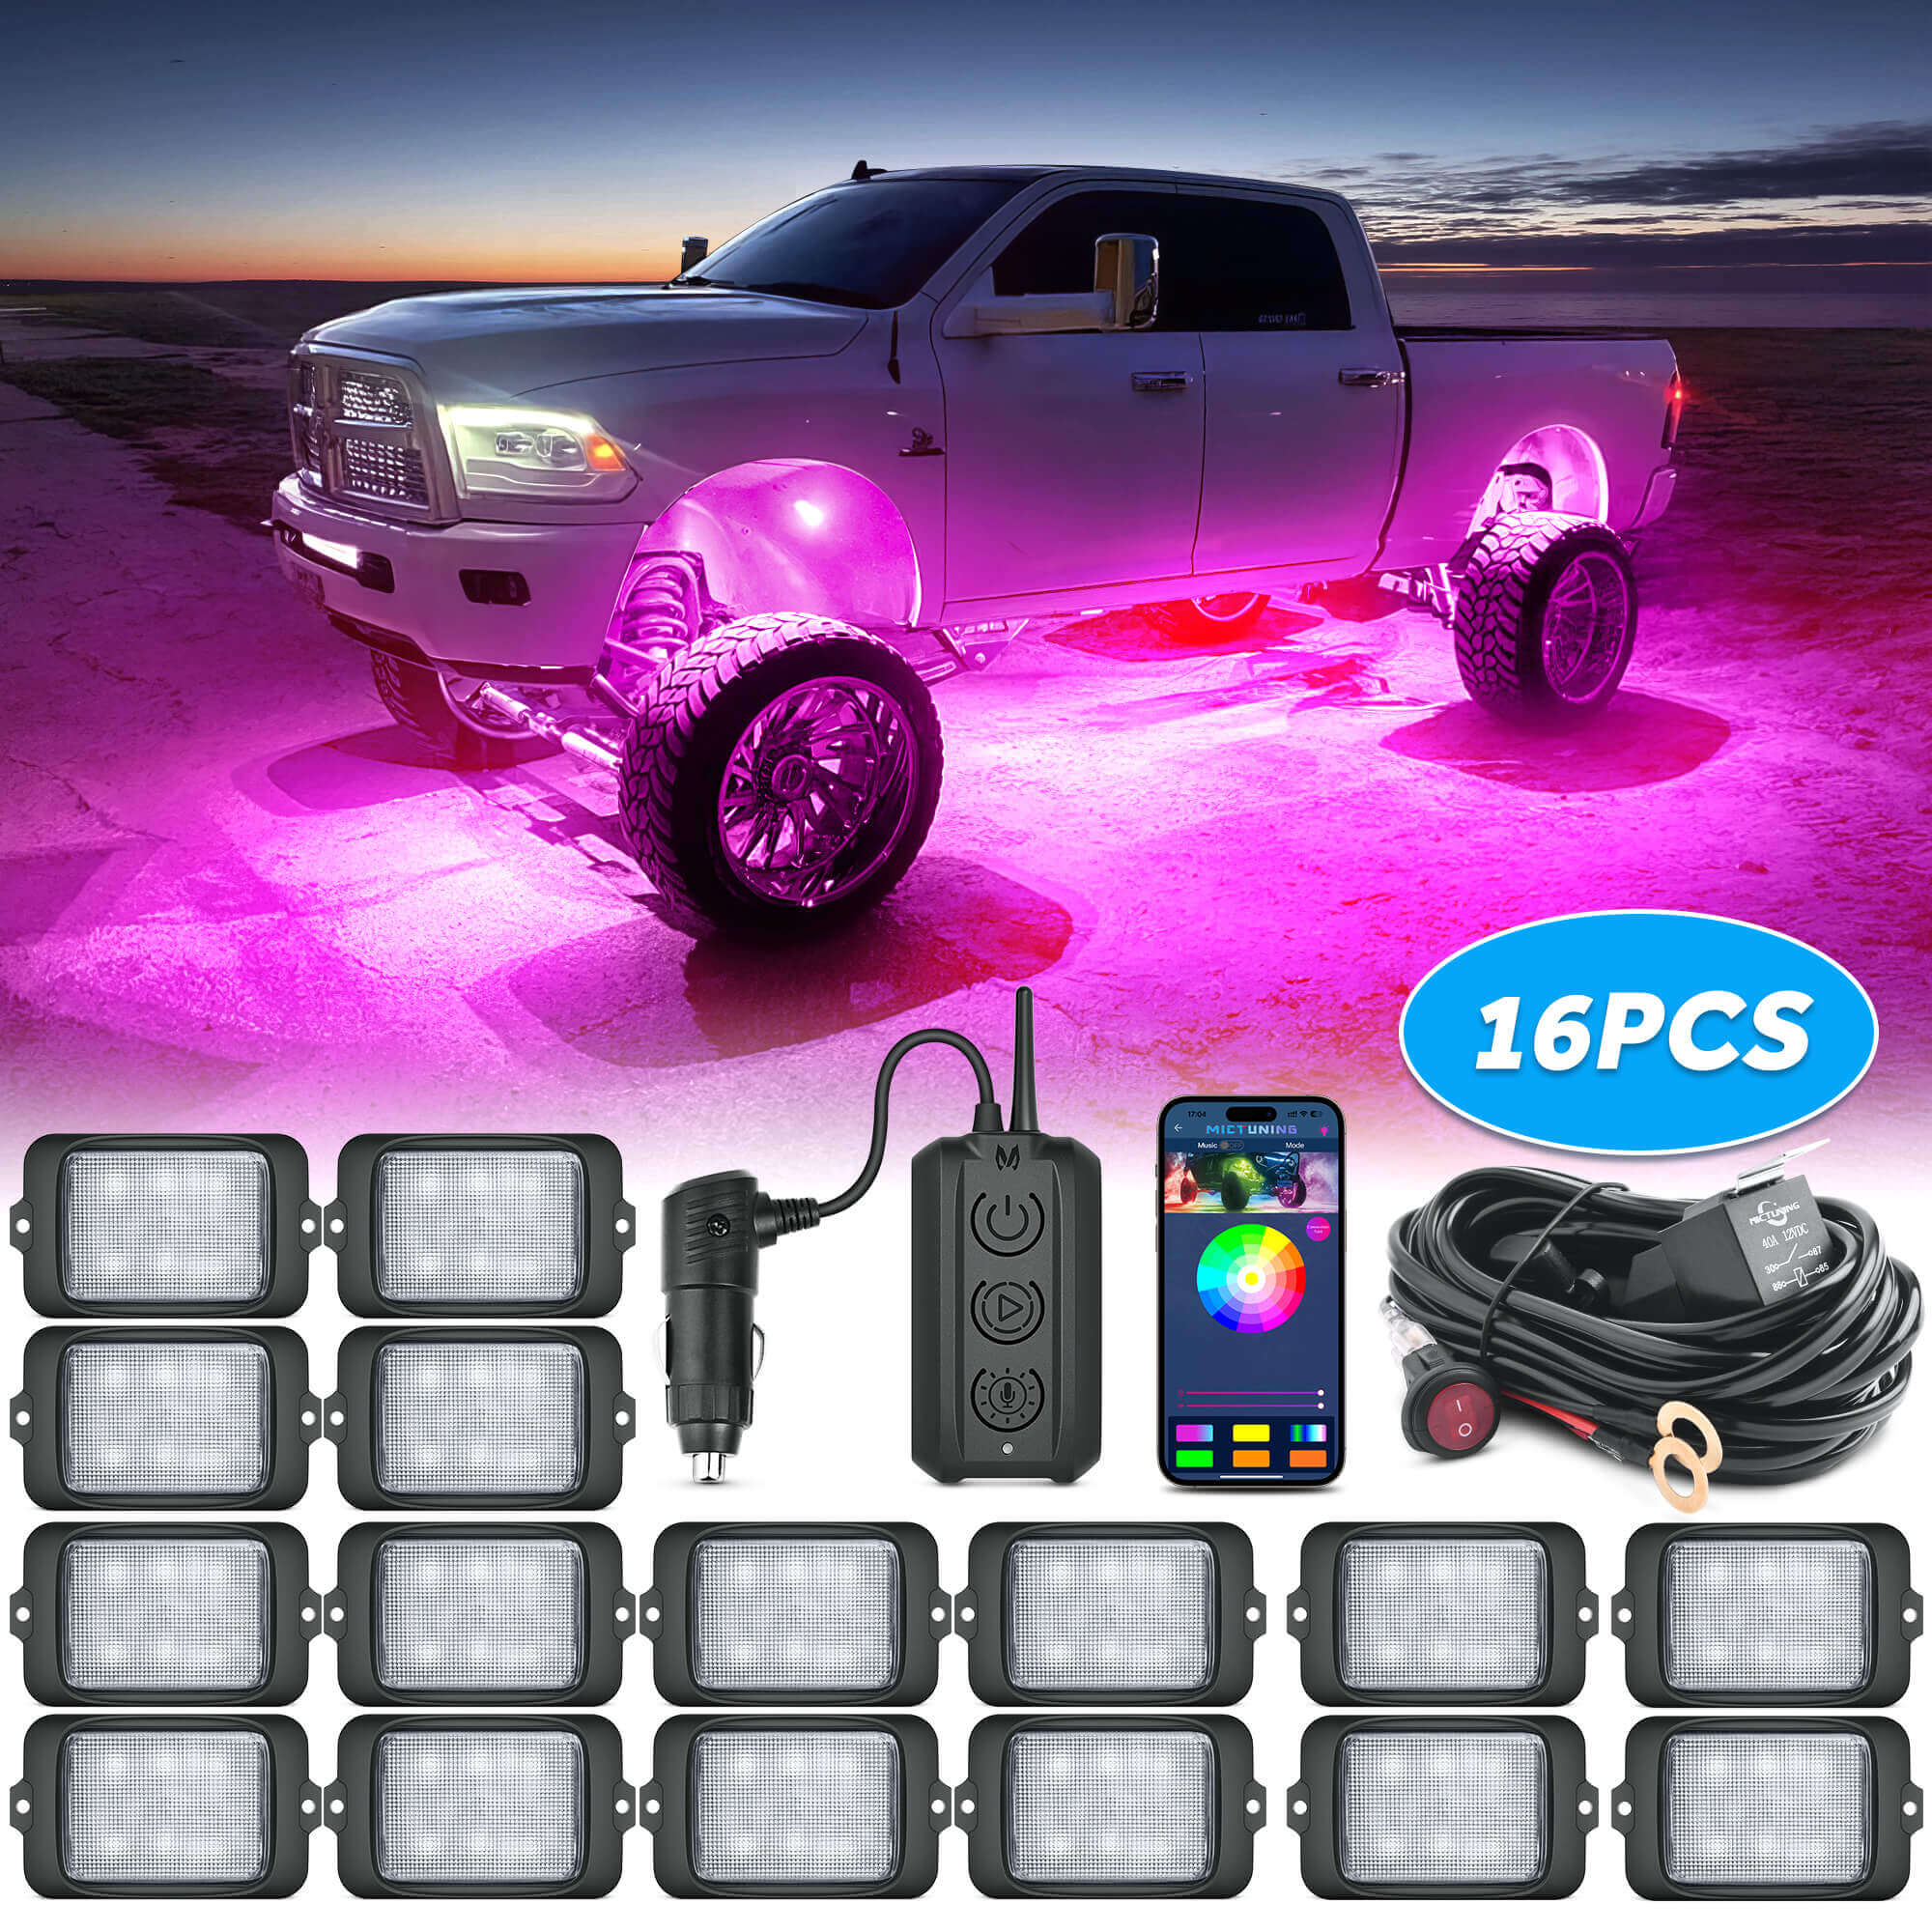 C3 Extensible RGBW LED Rock Lights - 16 Pods Wireless Control Multi-Color Neon Underglow Lights